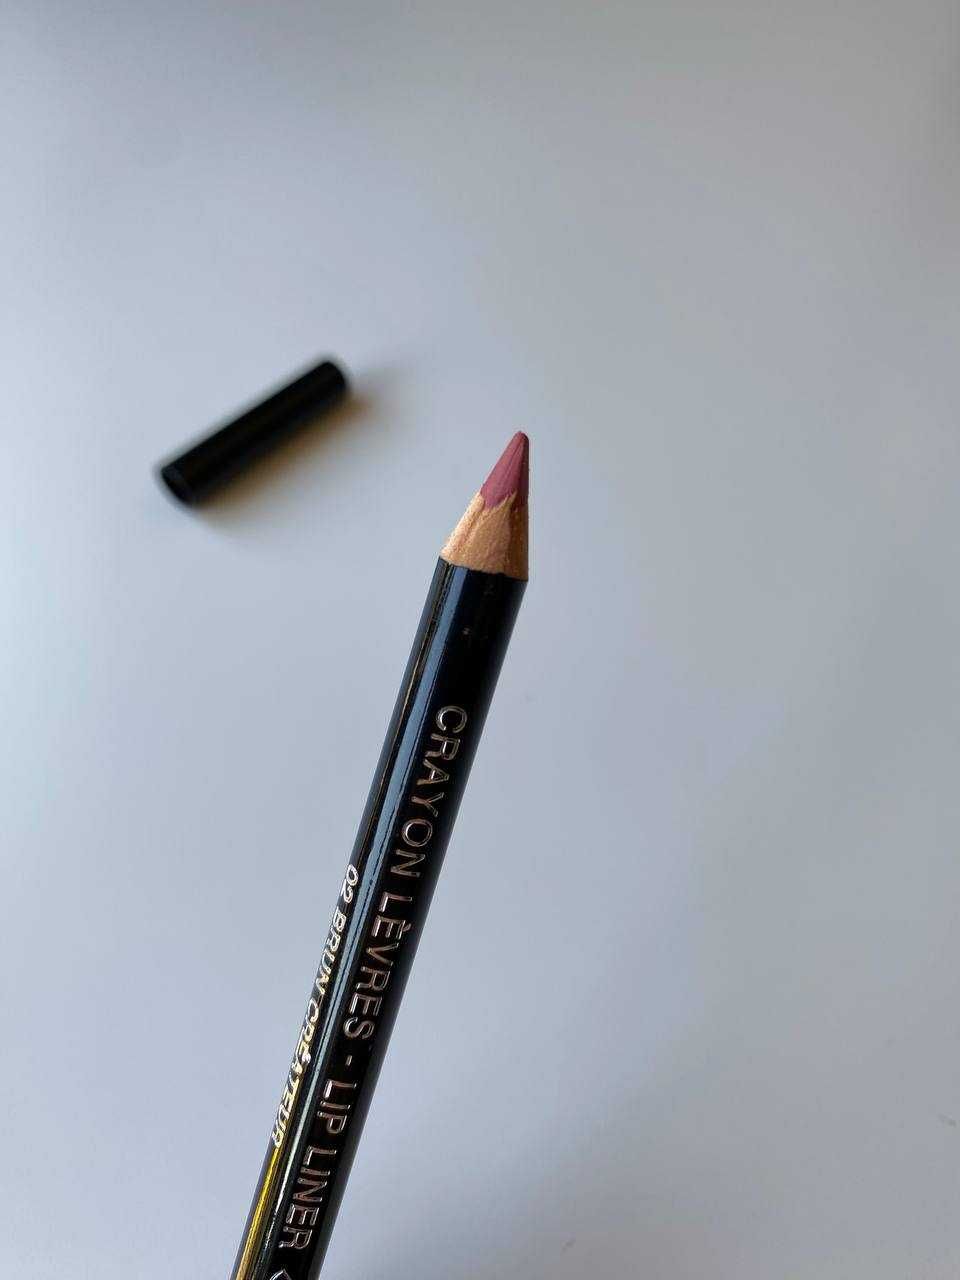 Givenchy lip liner, nude